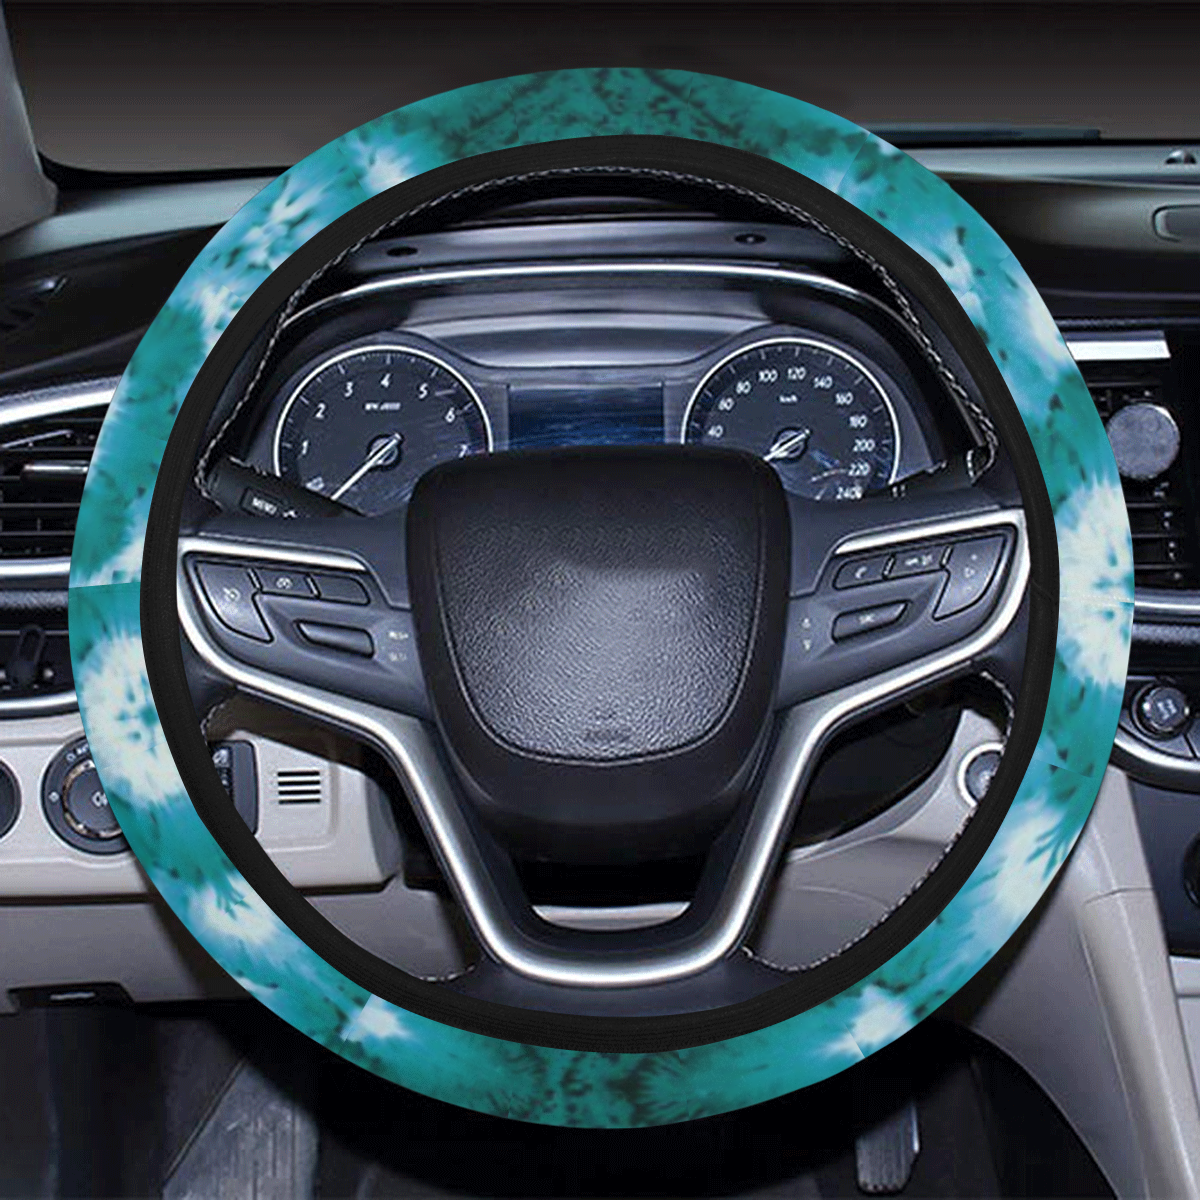 foulards 15 Steering Wheel Cover with Elastic Edge